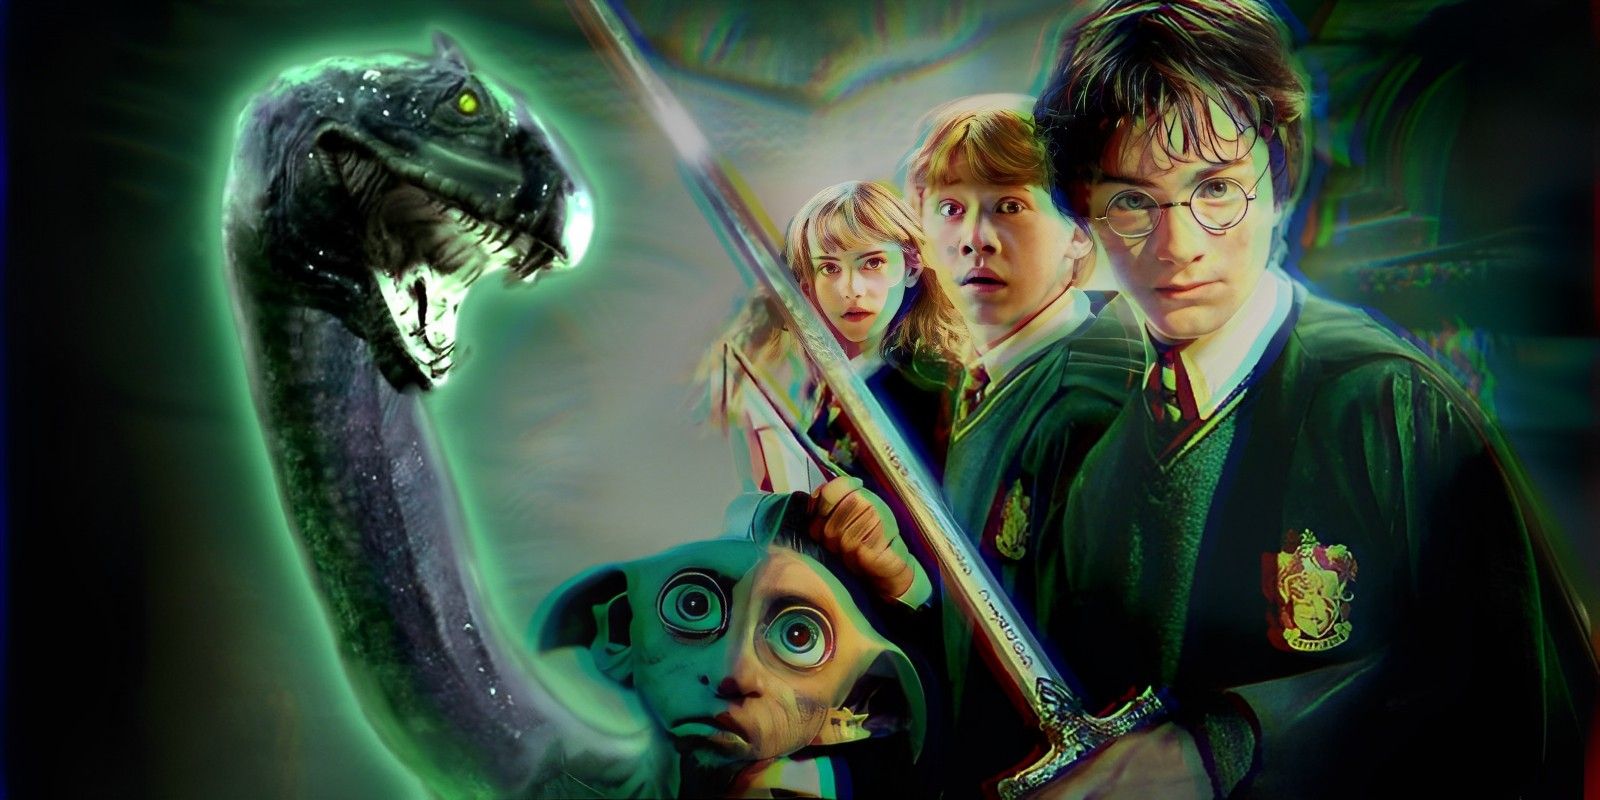 harry potter and the chamber of secrets movie basilisk